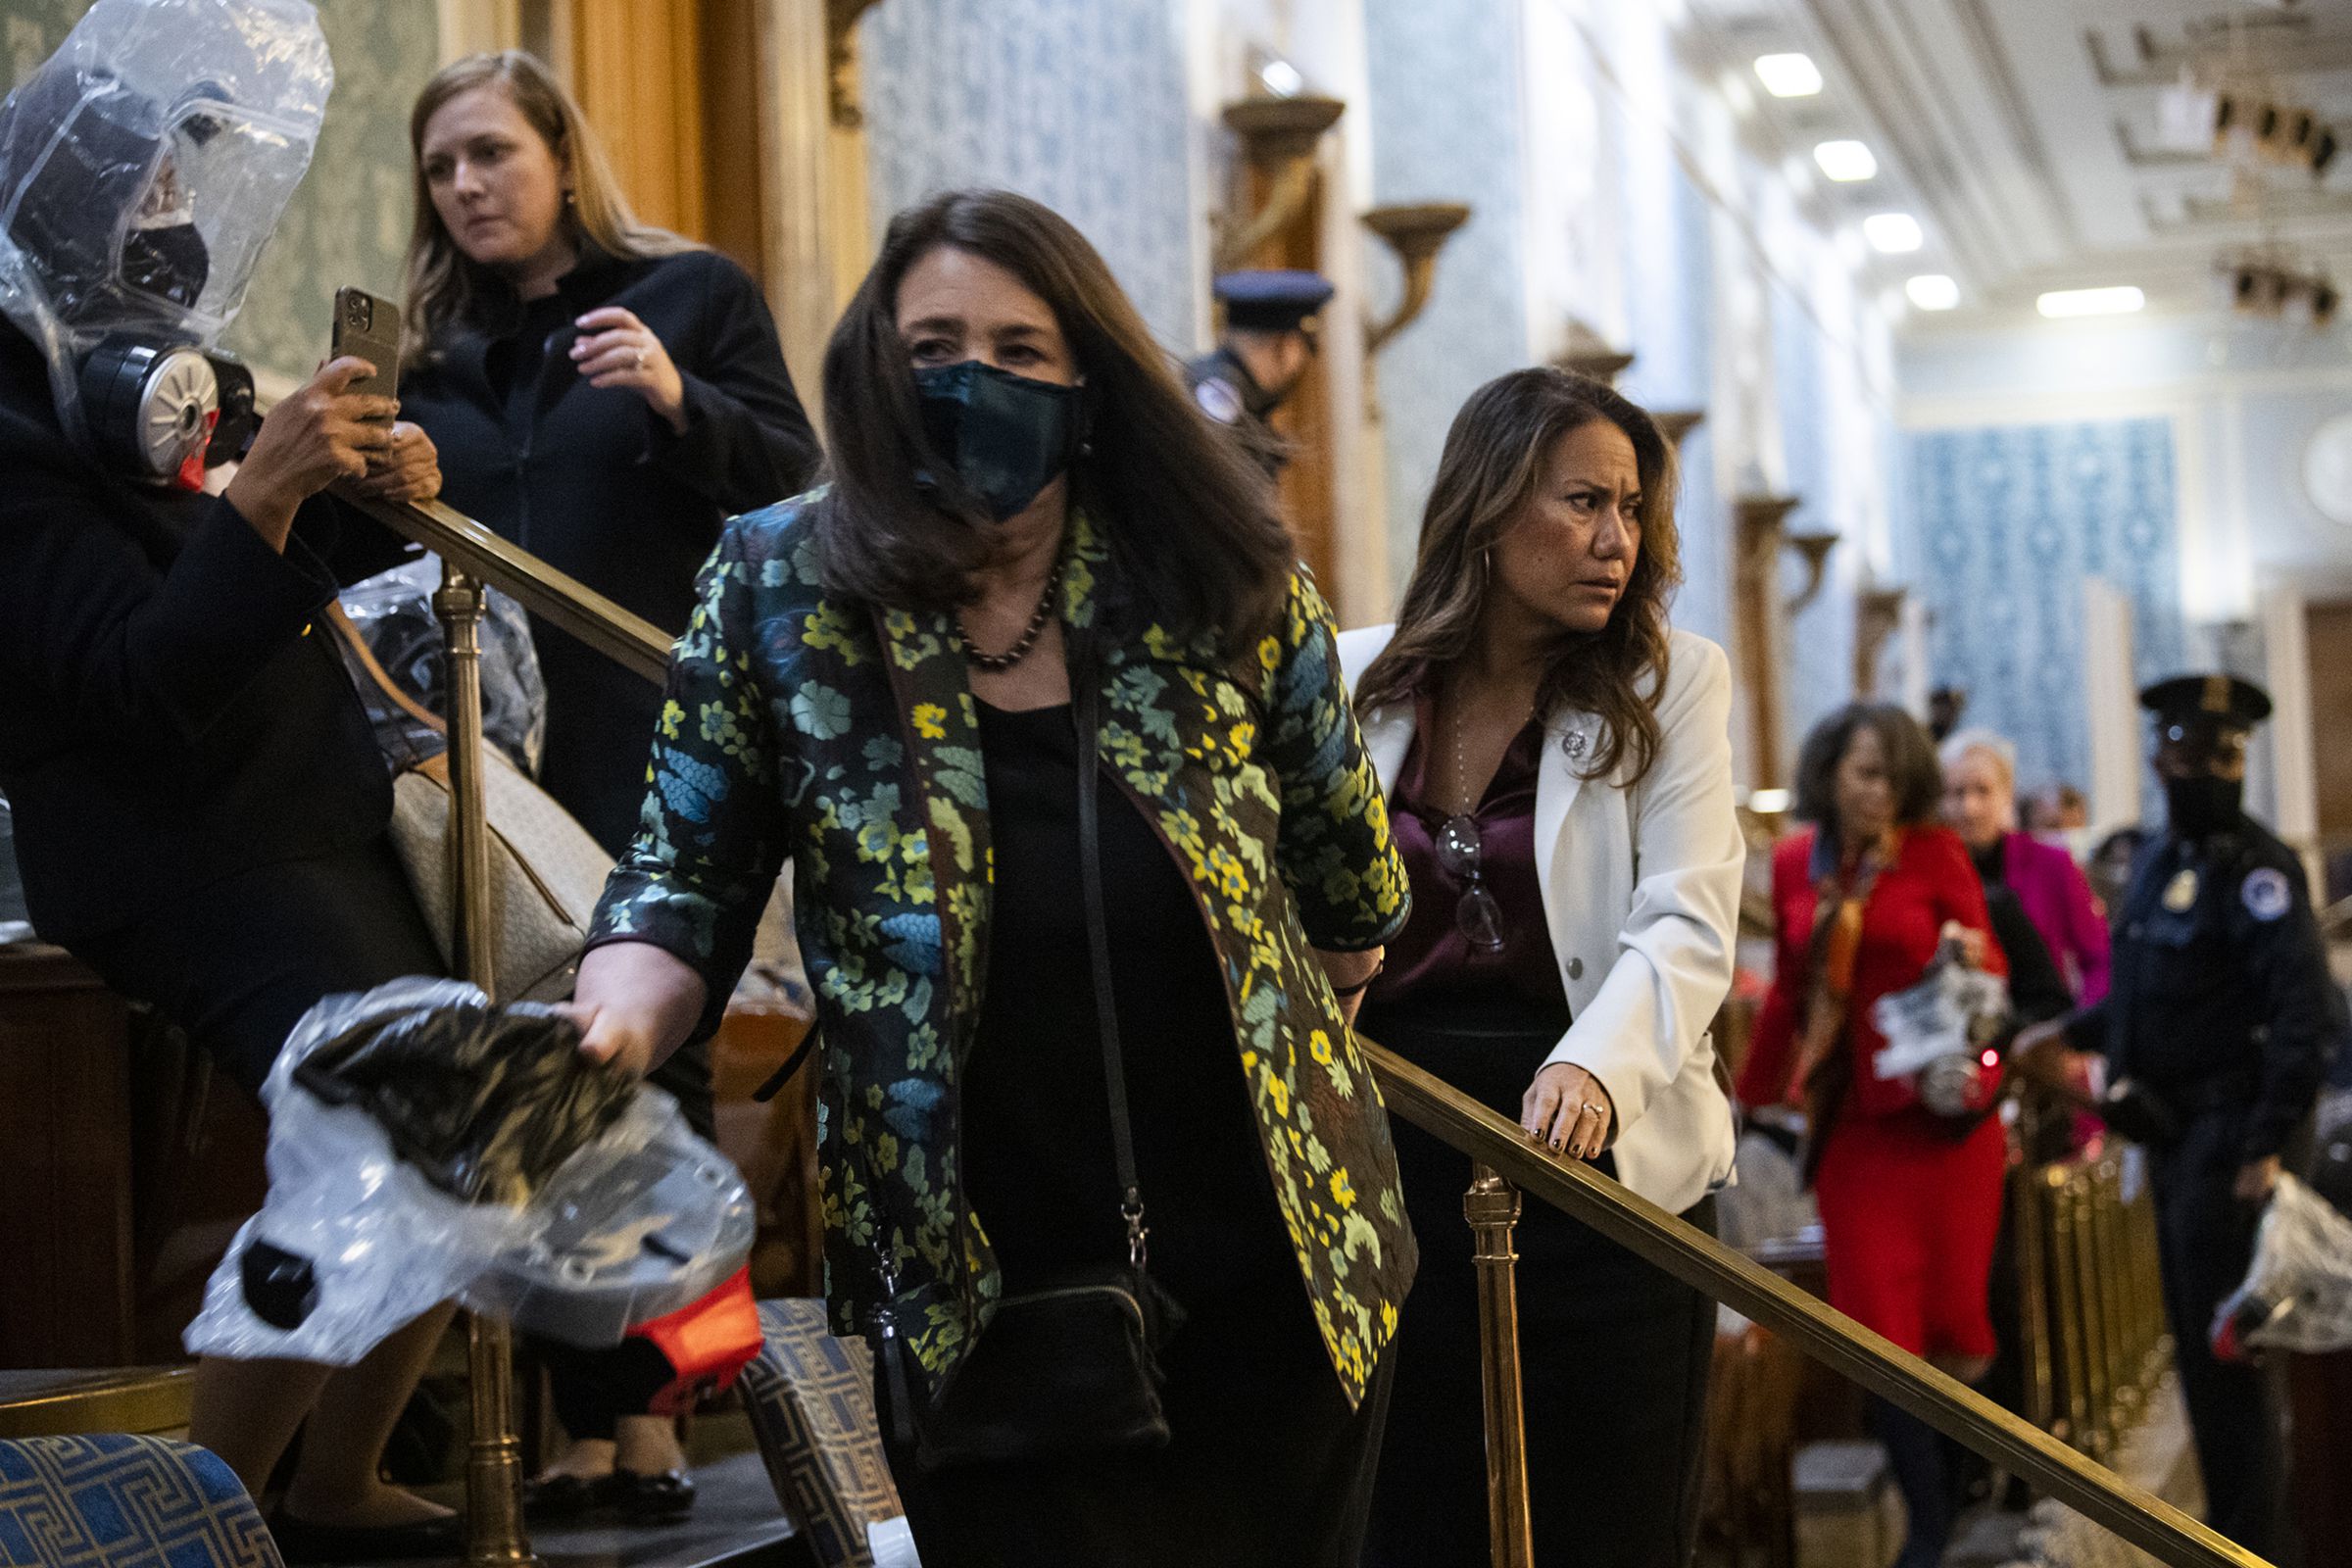 Reps. Diana DeGette (D-CO) and Veronica Escobar (D-TX) are directed toward exits by Capitol Police.